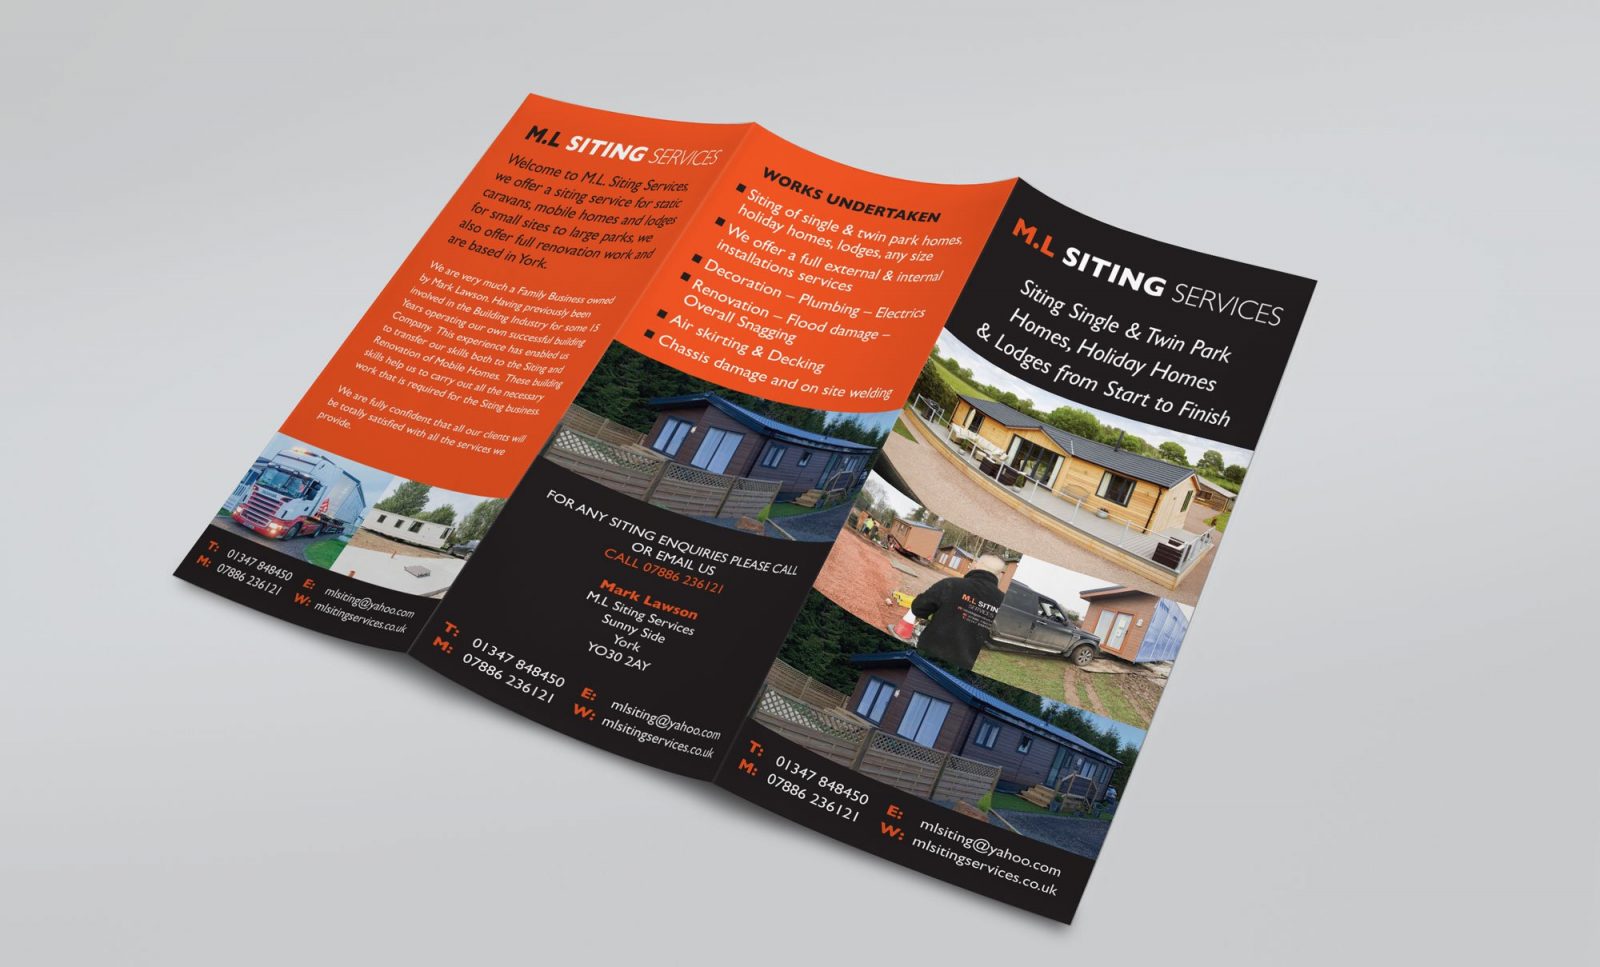 An A4 folded leaflet design for M.L Siting Services, showing the outer pages